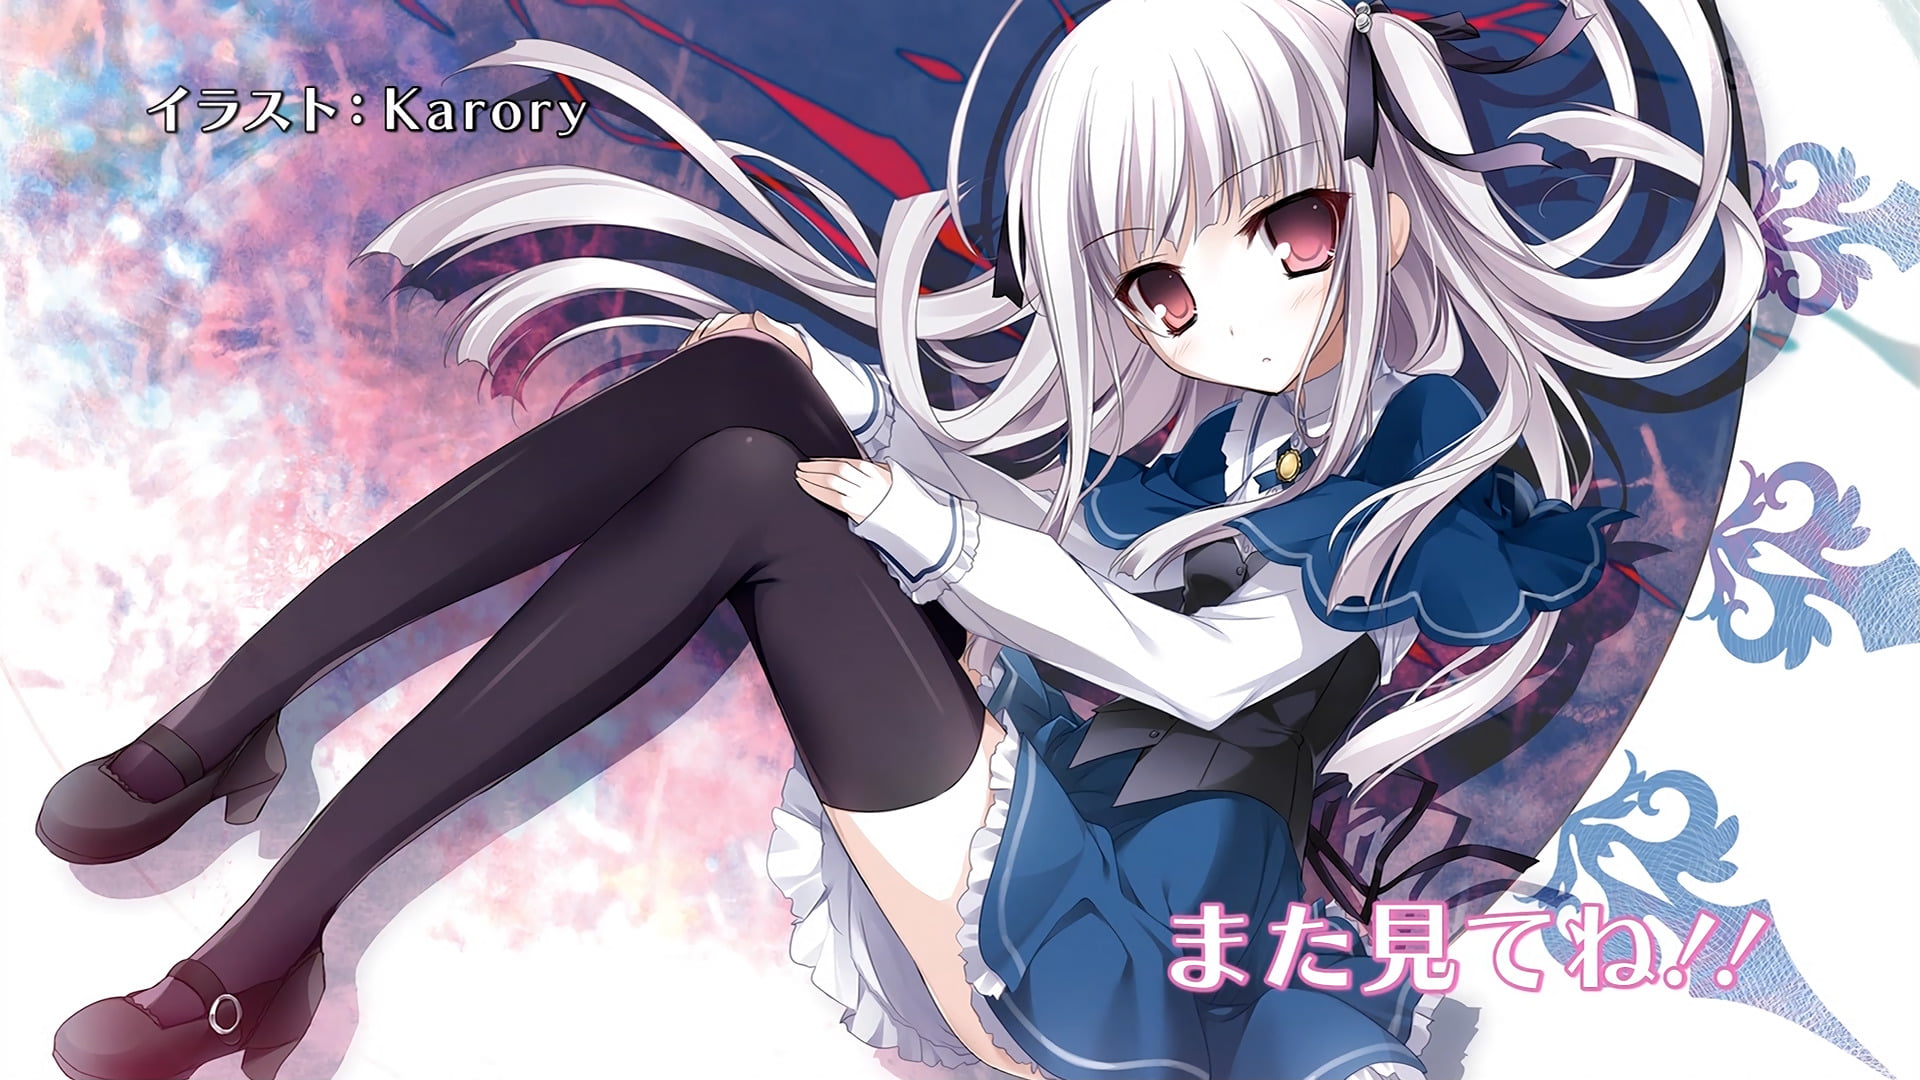 Anime, Absolute Duo, Julie Sigtuna, lifestyles, leisure activity